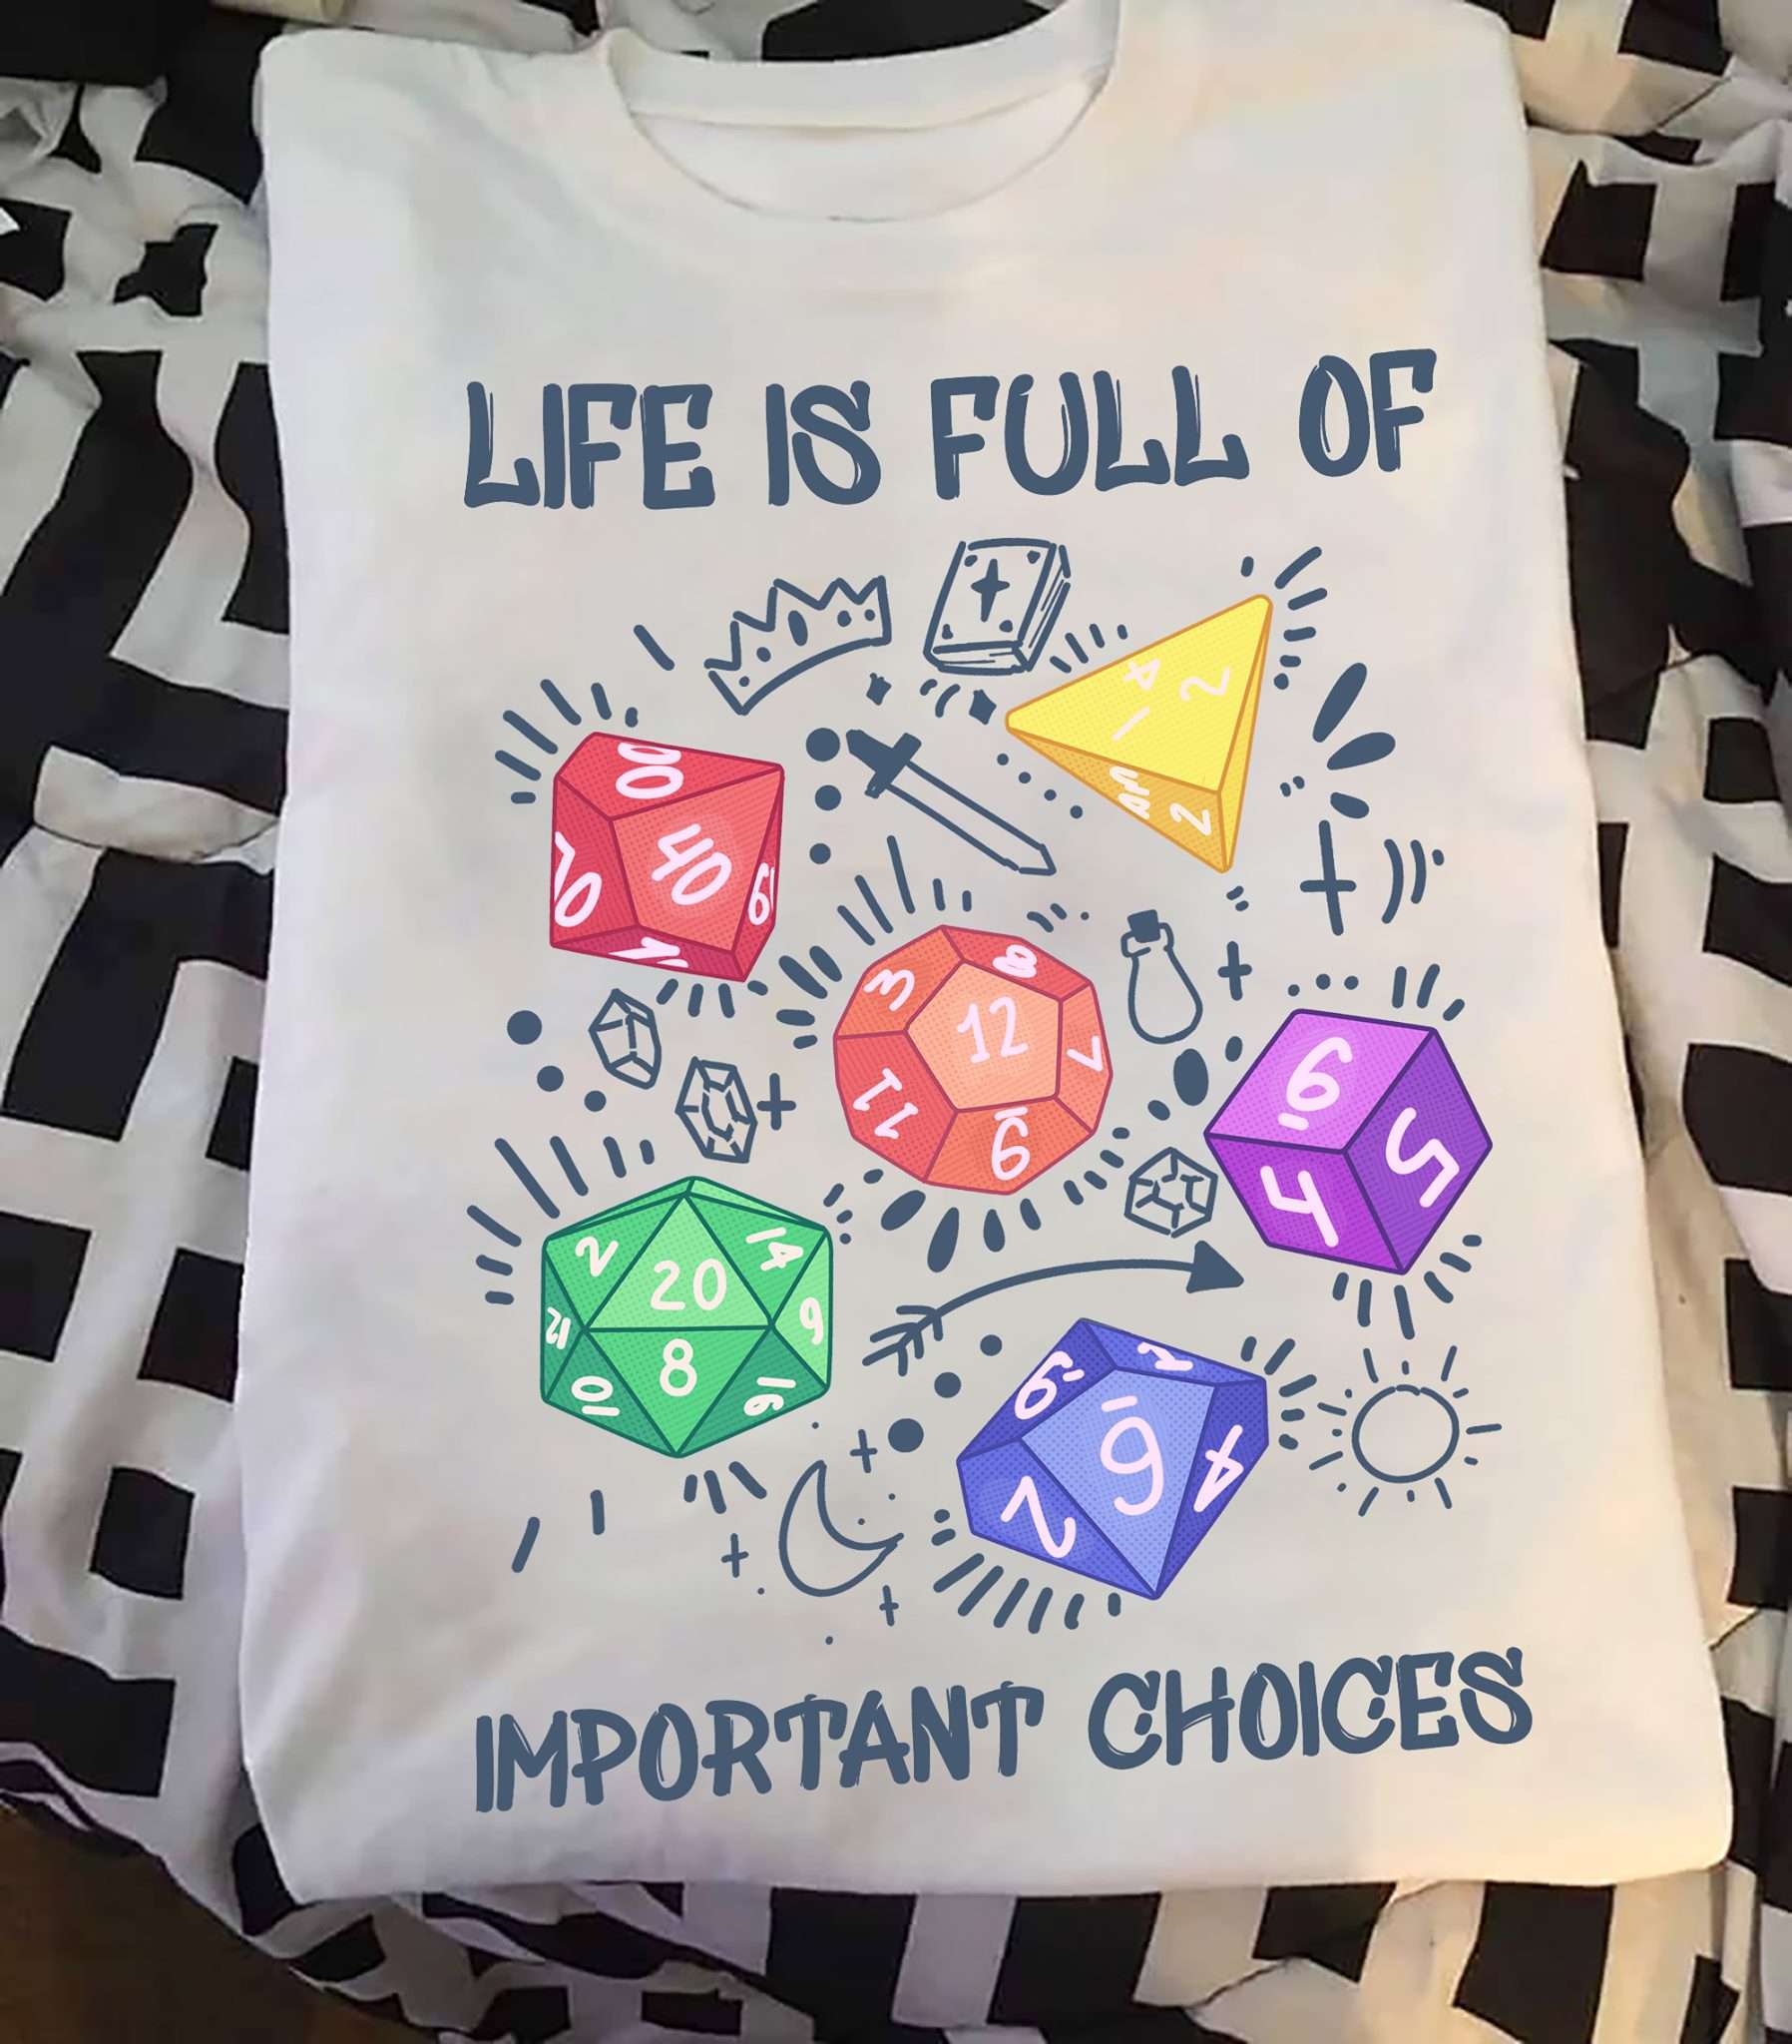 Life is full of important choices - Rolling initiative, Dungeons and Dragons